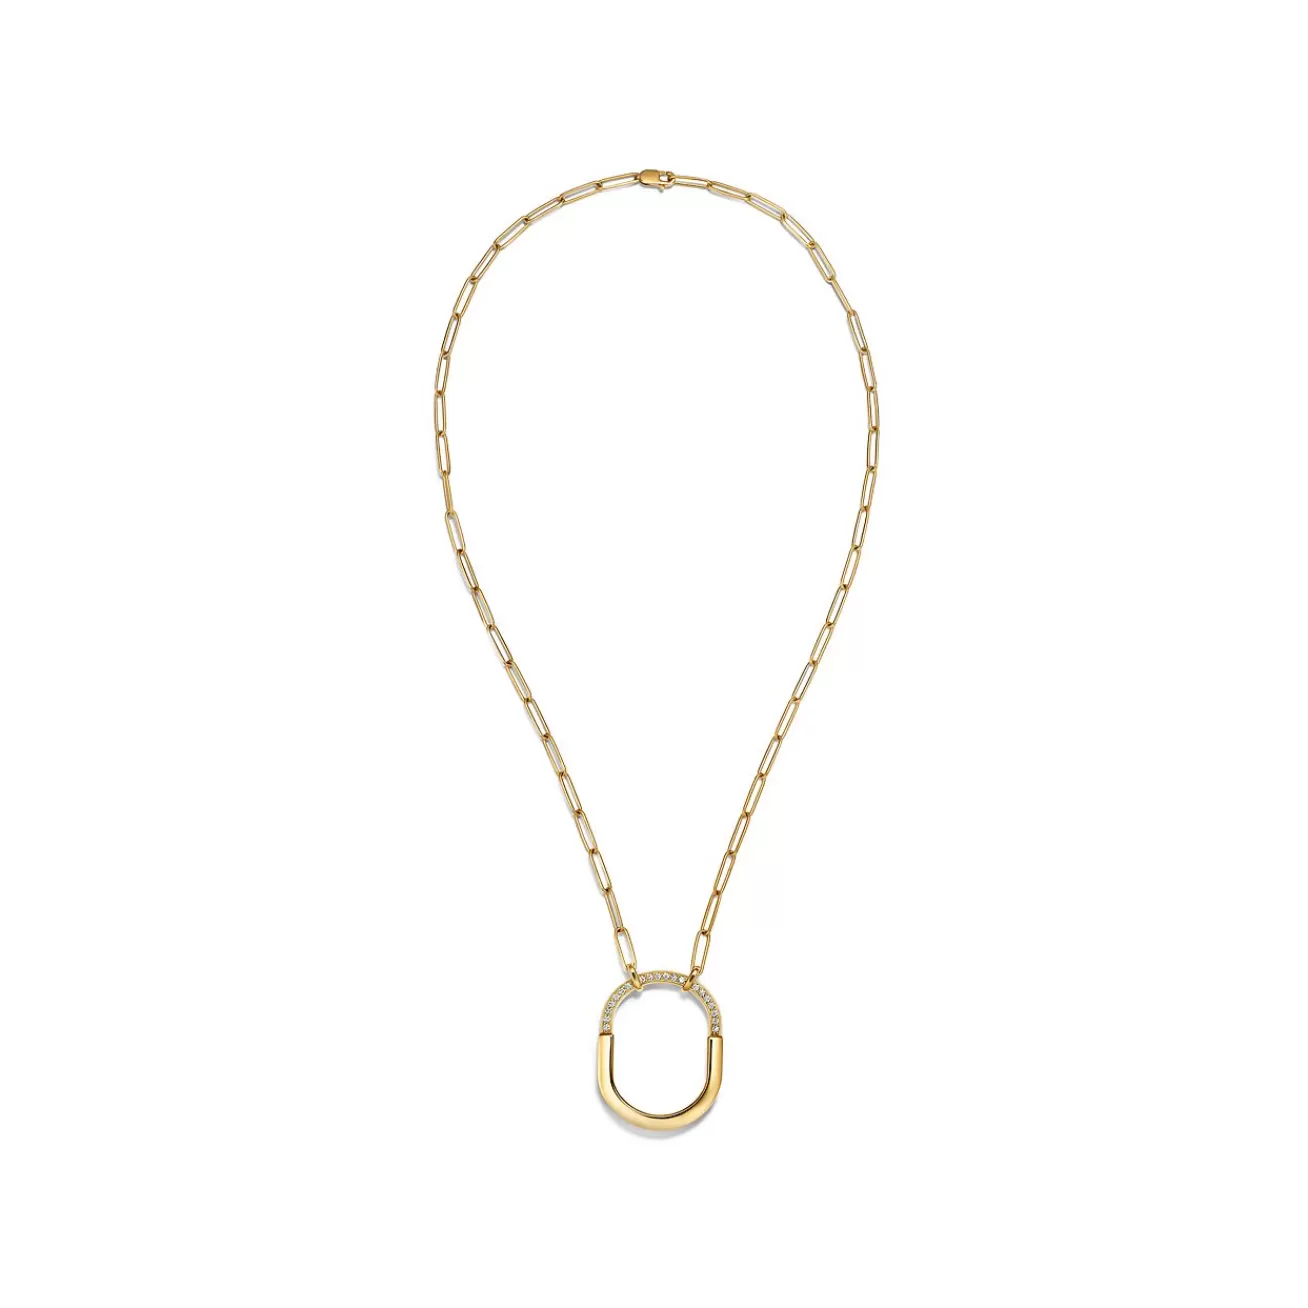 Tiffany & Co. Tiffany Lock Pendant in Yellow Gold with Diamonds, Large | ^ Necklaces & Pendants | Gifts for Her